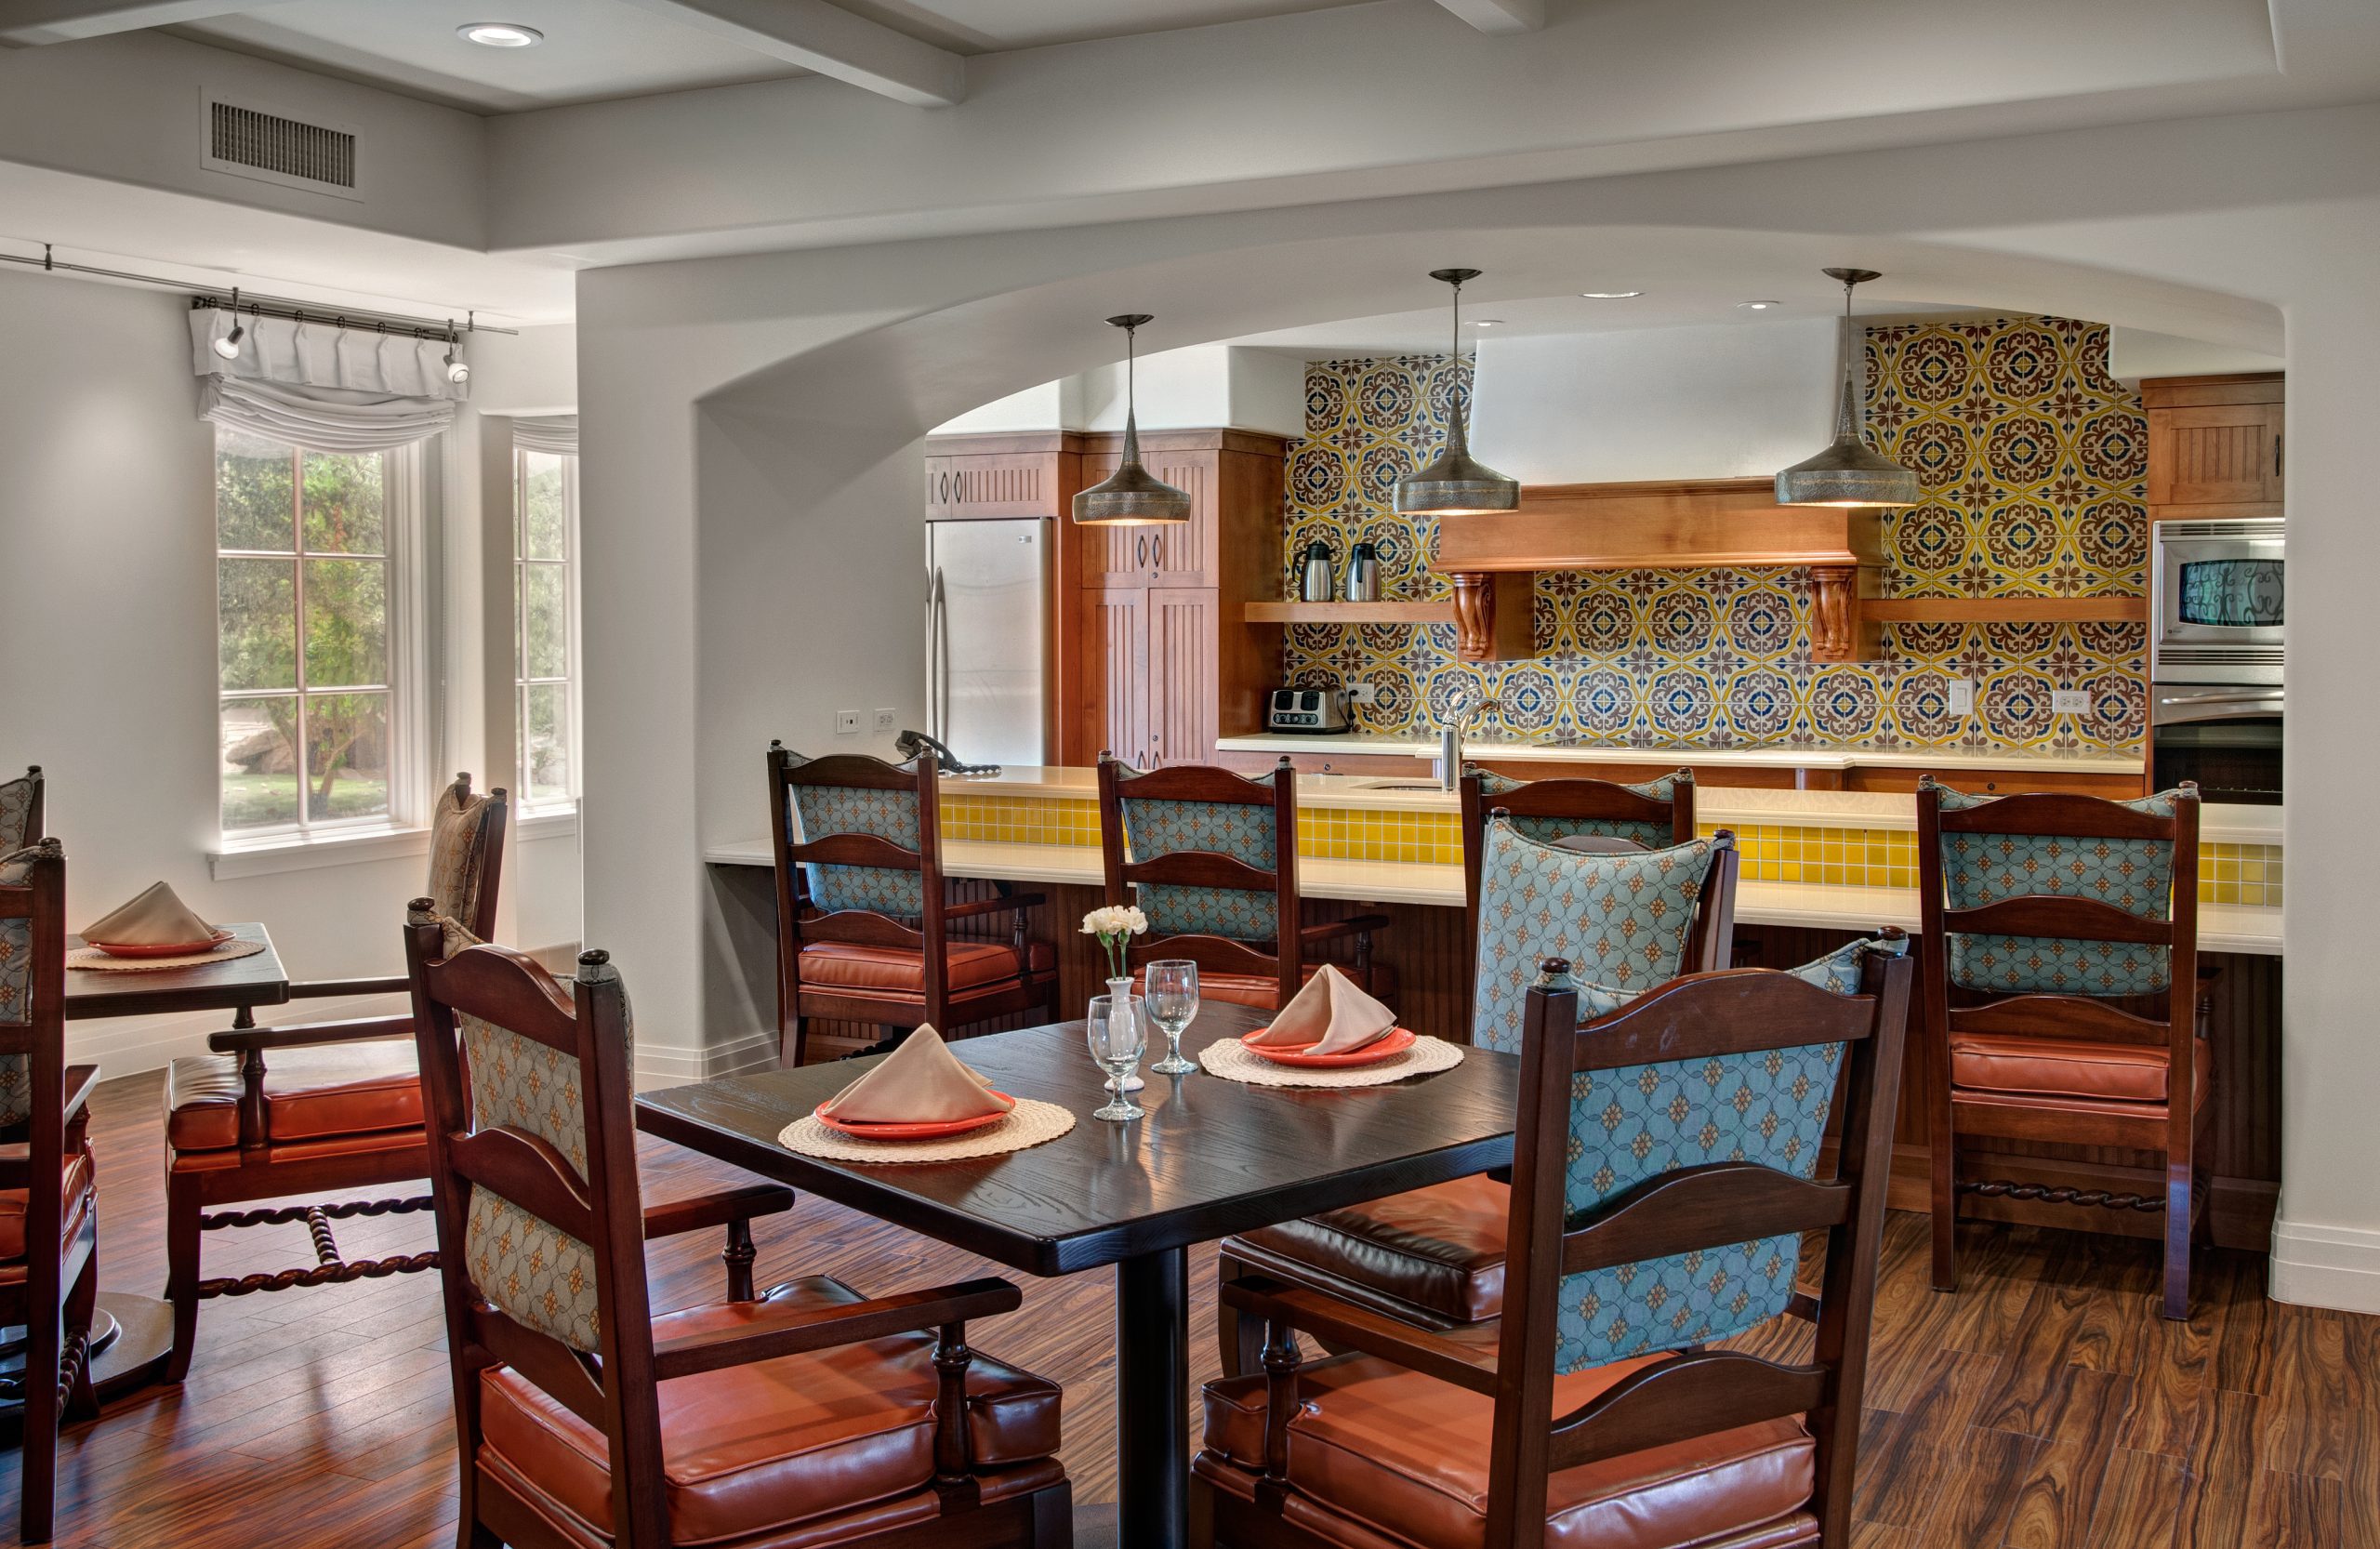 A well-lit kitchen with a wooden dining table and chairs, creating a cozy and inviting atmosphere.